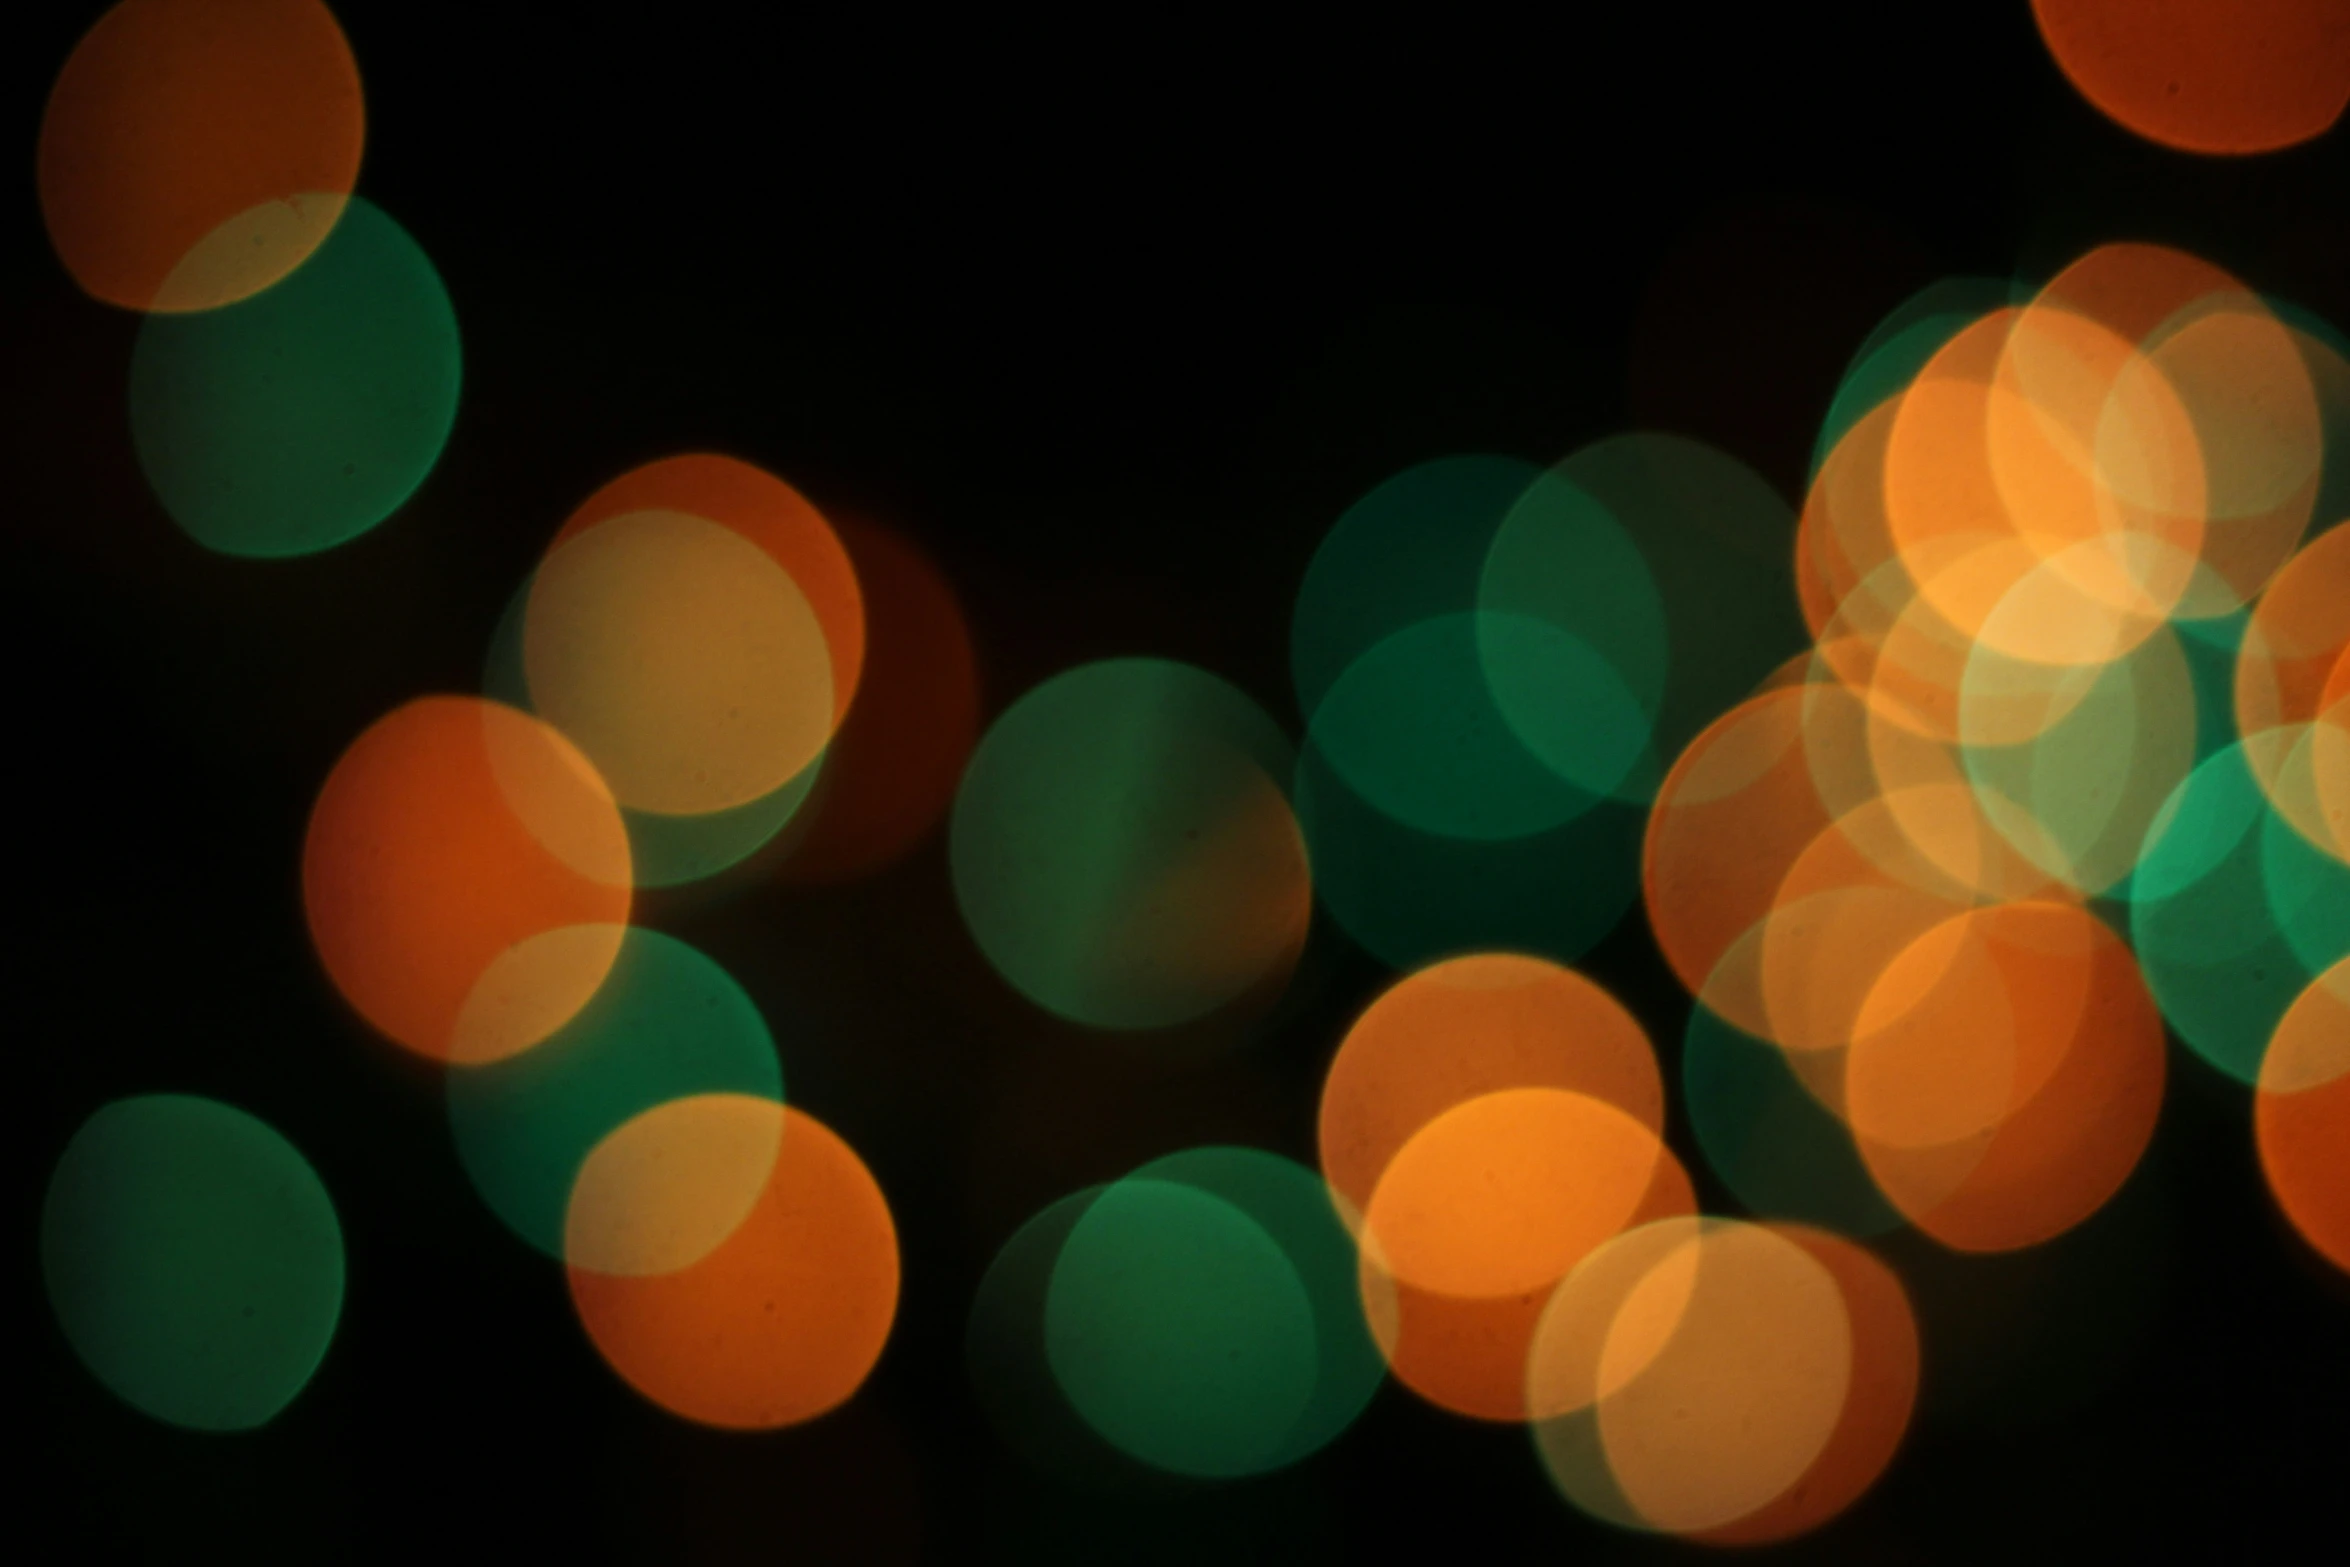 a blurry image of colorful and circular lights